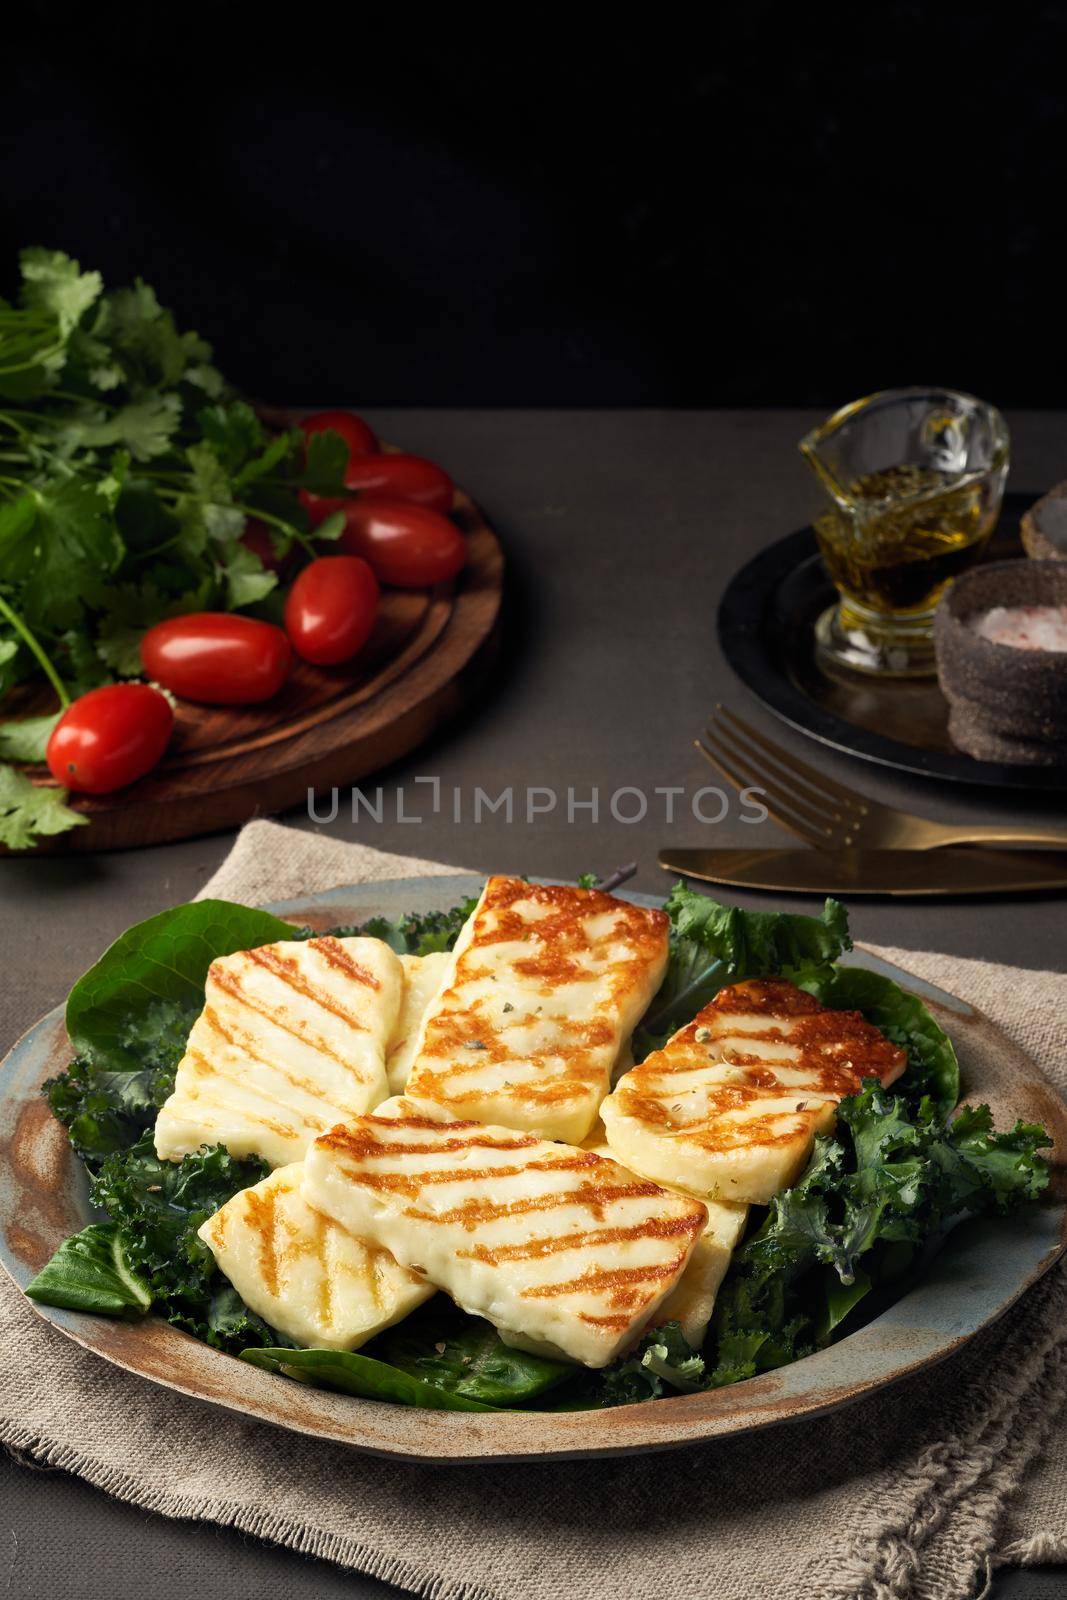 Cyprus fried halloumi cheese with healthy green salad. Lchf, pegan, fodmap, paleo, scd, keto diet. by NataBene